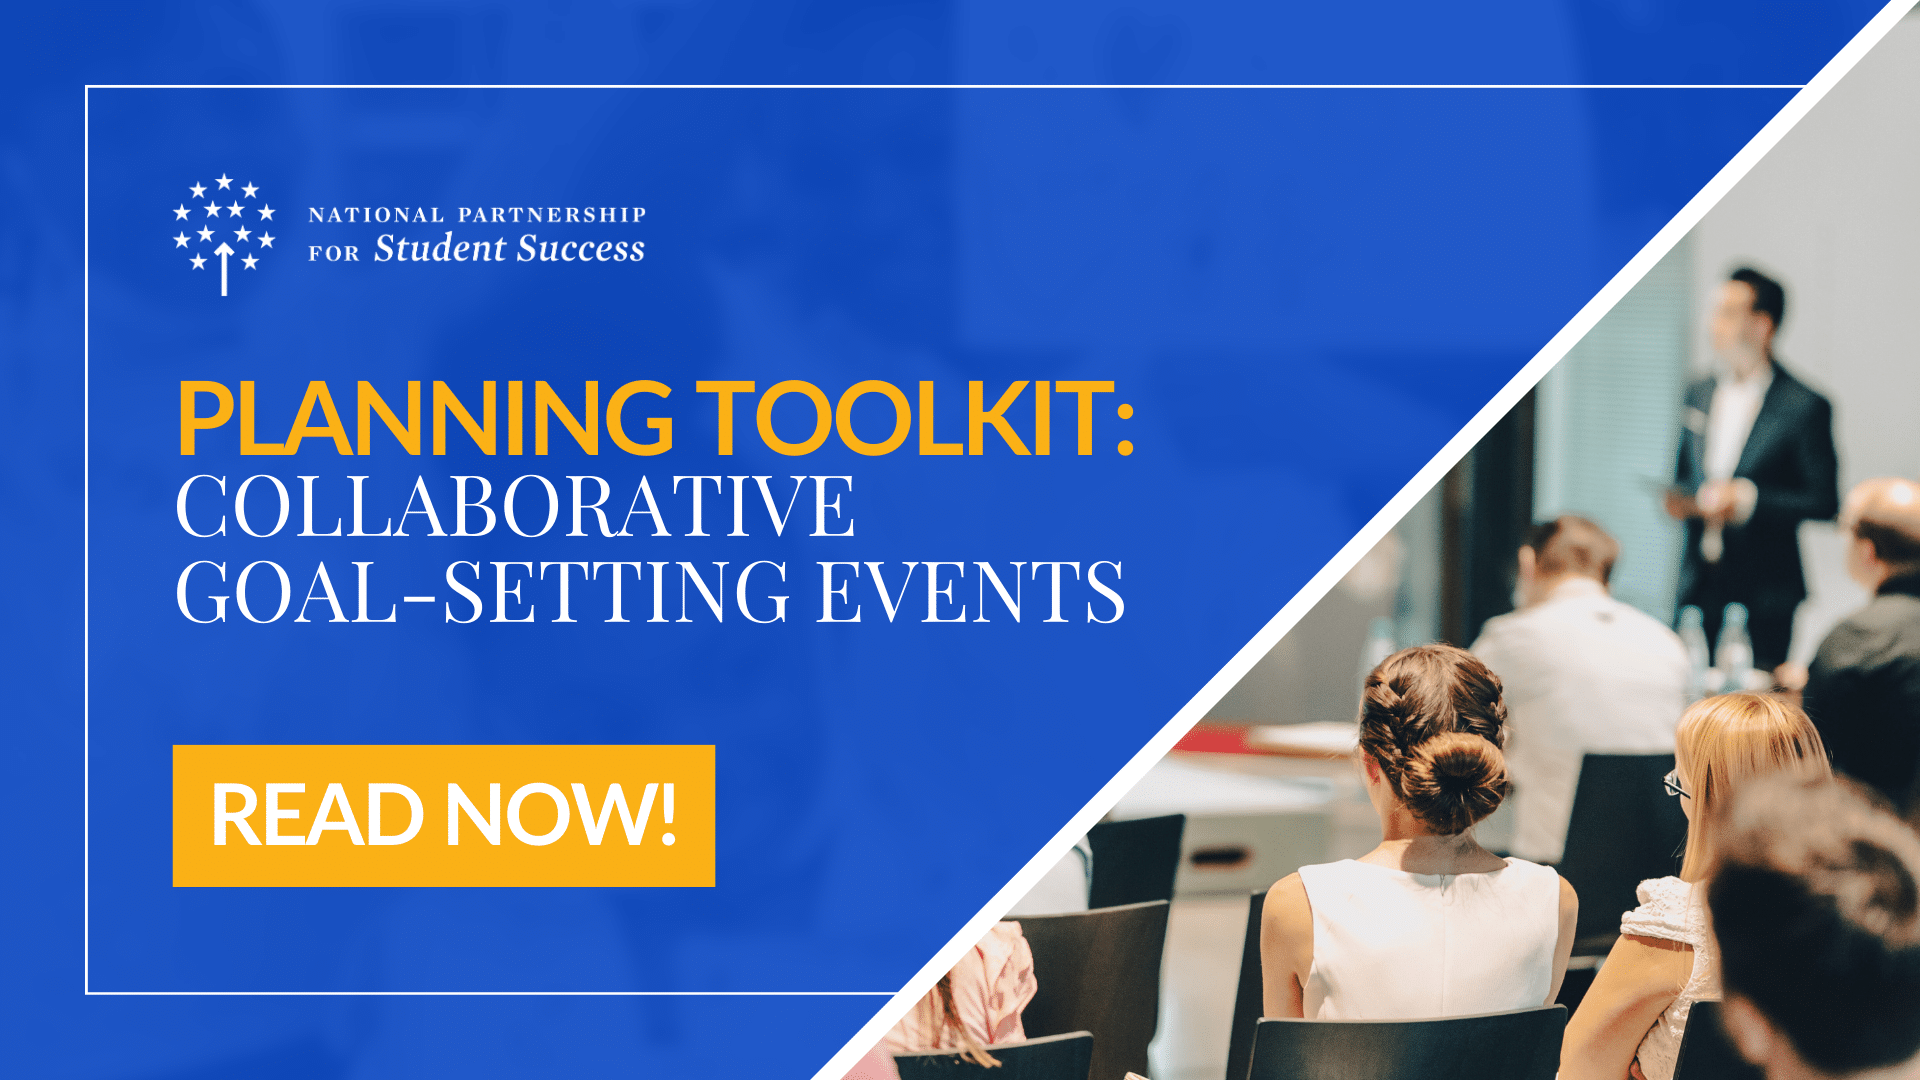 Planning Toolkit for Collaborative Goal-Setting Events